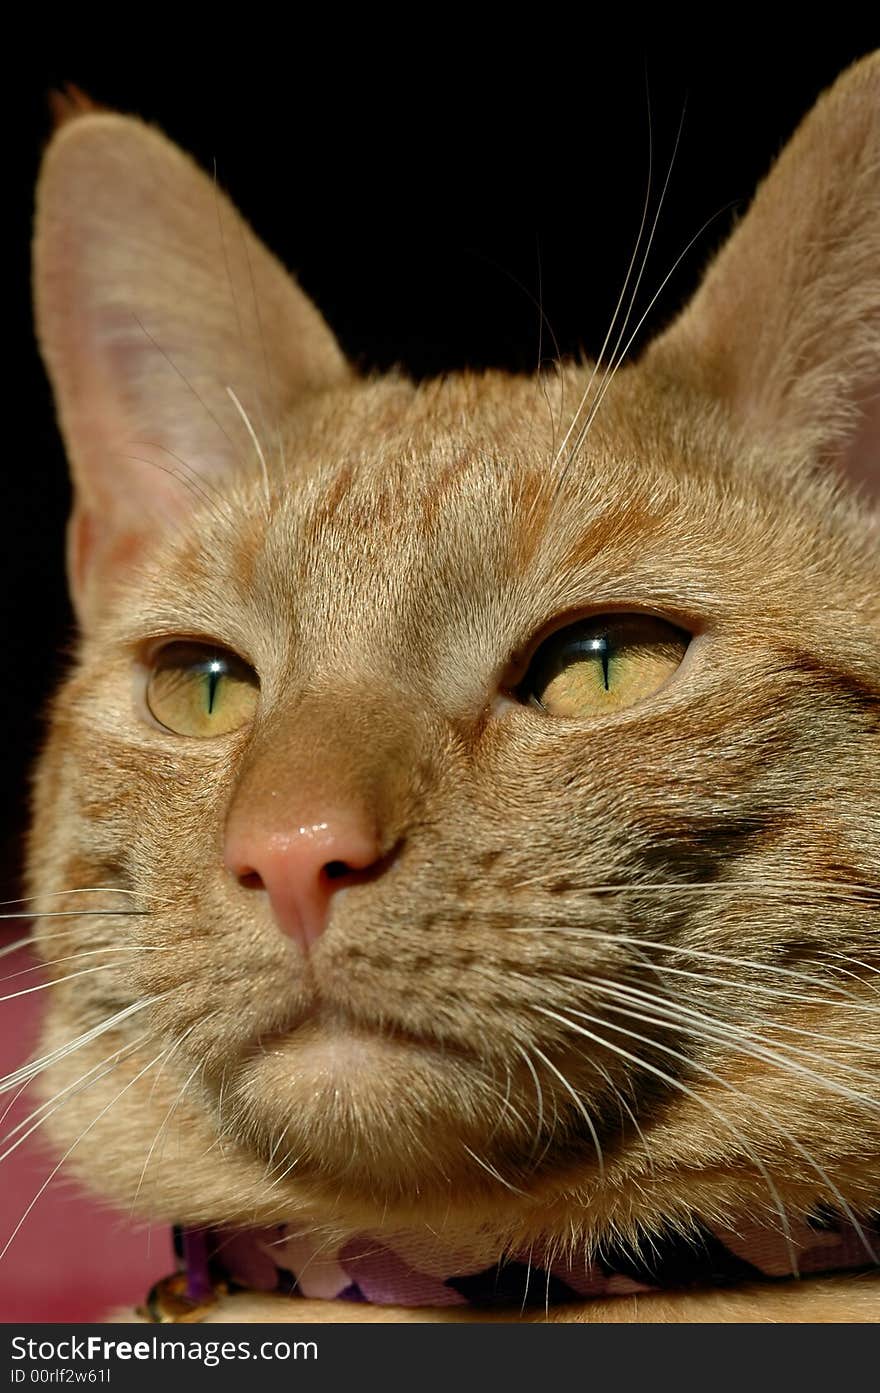 Handsome red tabby cat close-up portrait